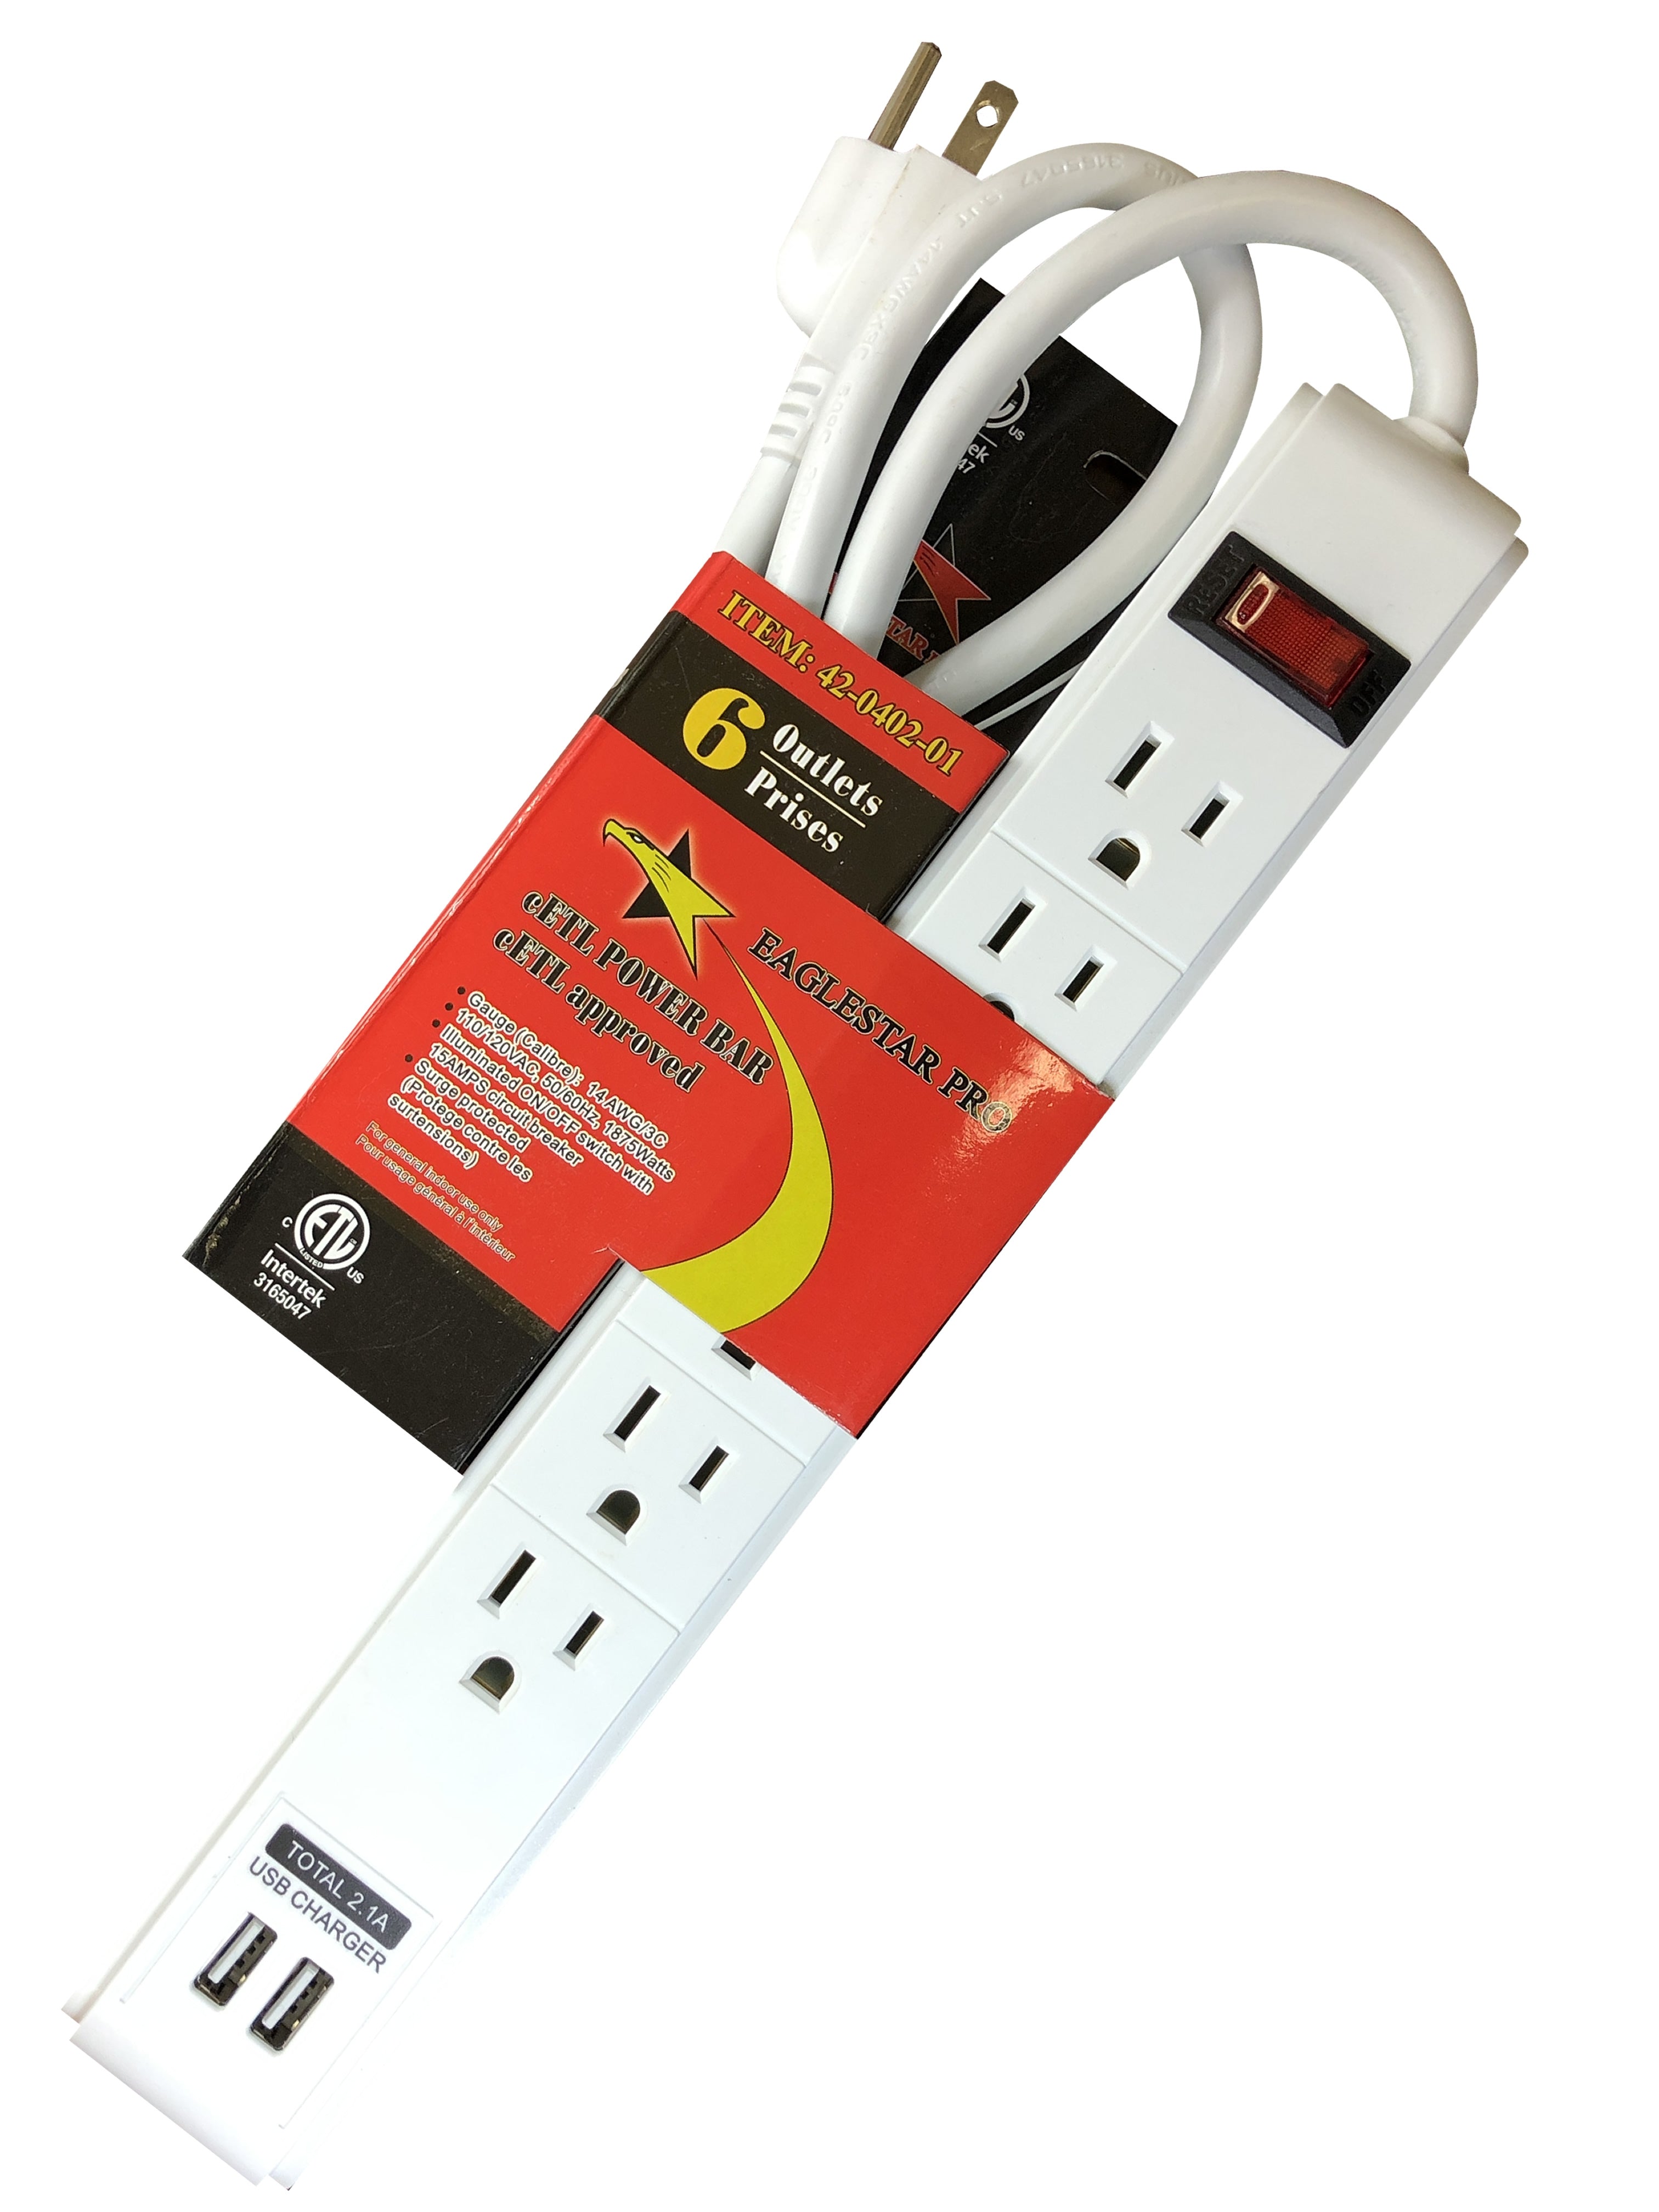 42-0402-01 6 Outlet Power Strip Bar with 3 ft Cord and dual USB, cUL Approved,vertical power distribution